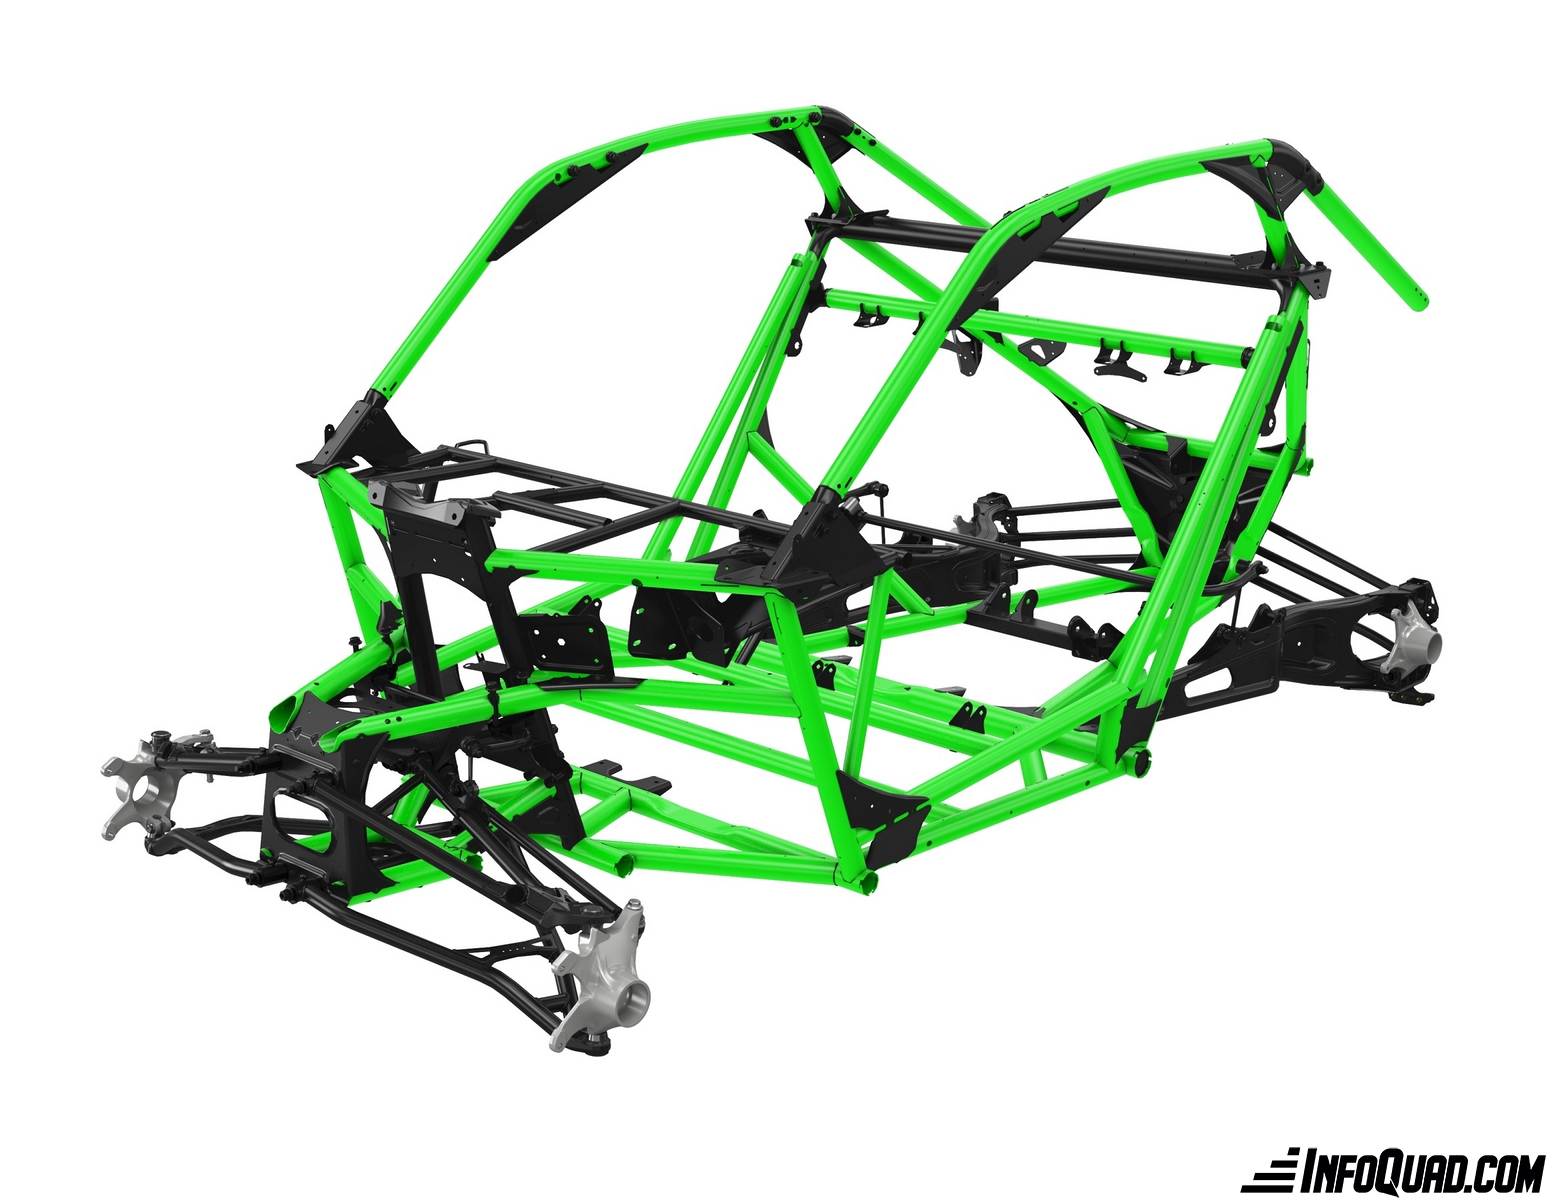 Reinforced X3 chassis